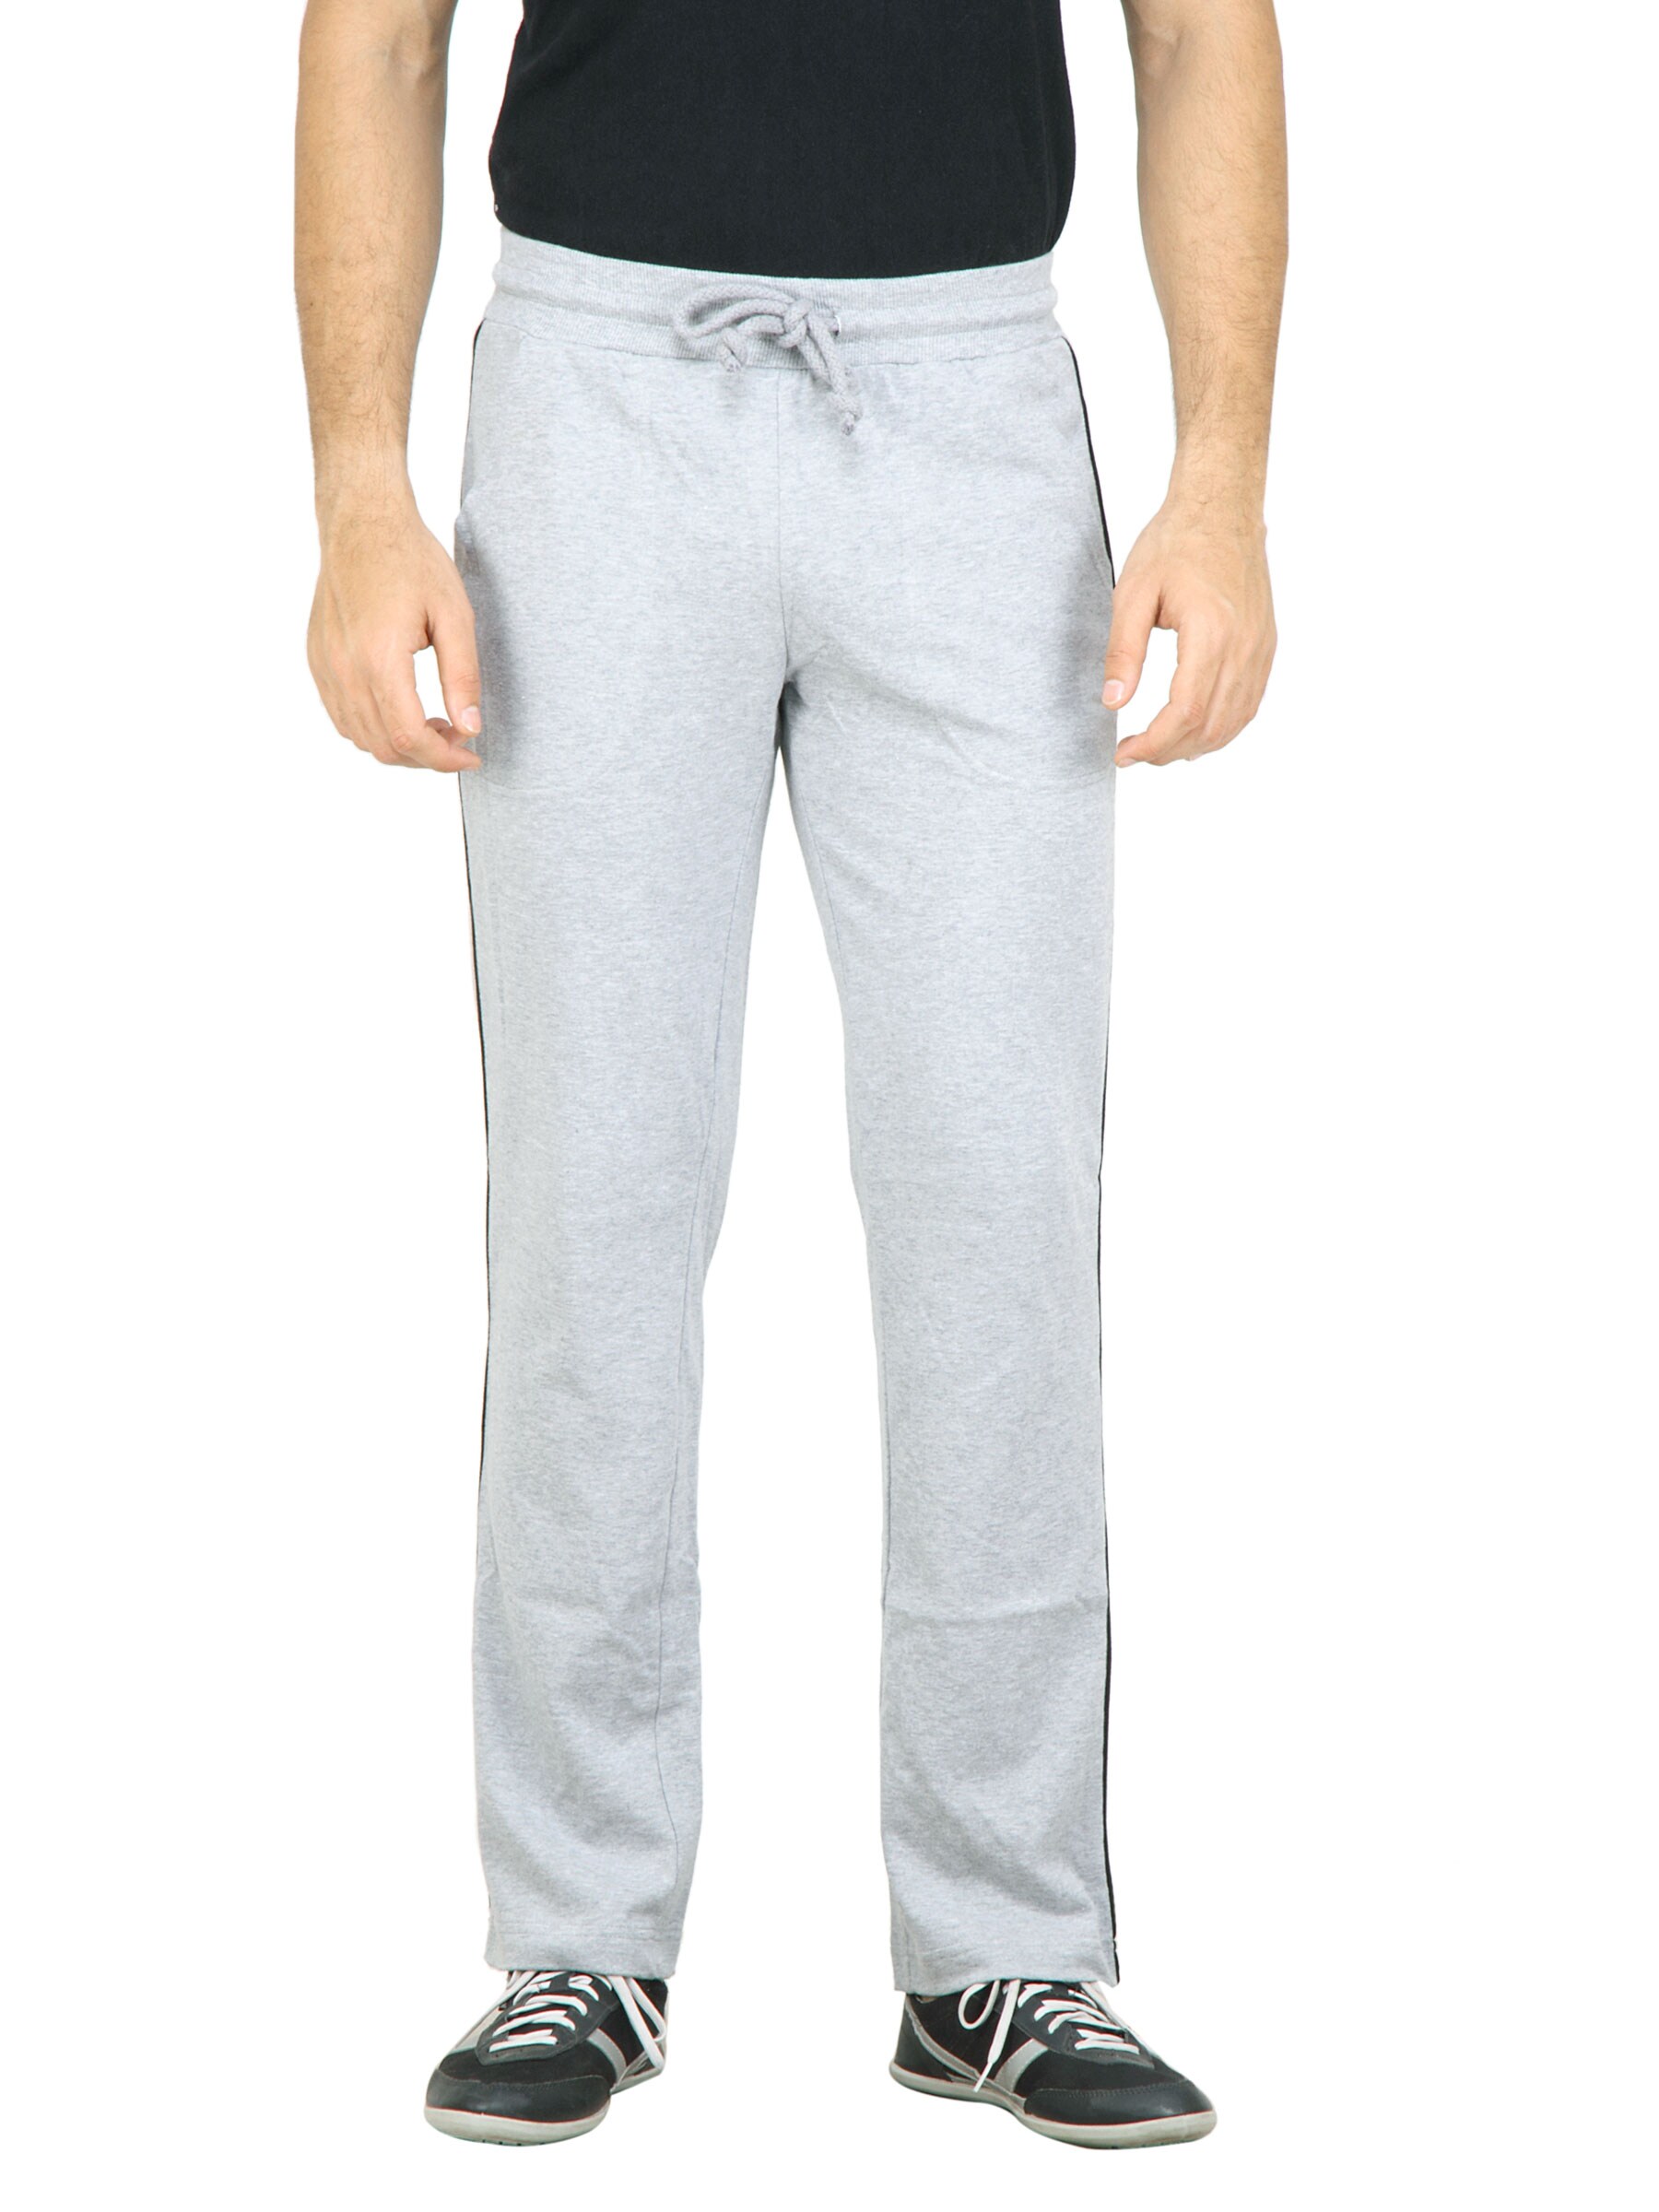 United Colors of Benetton Men Solid Grey Track Pants